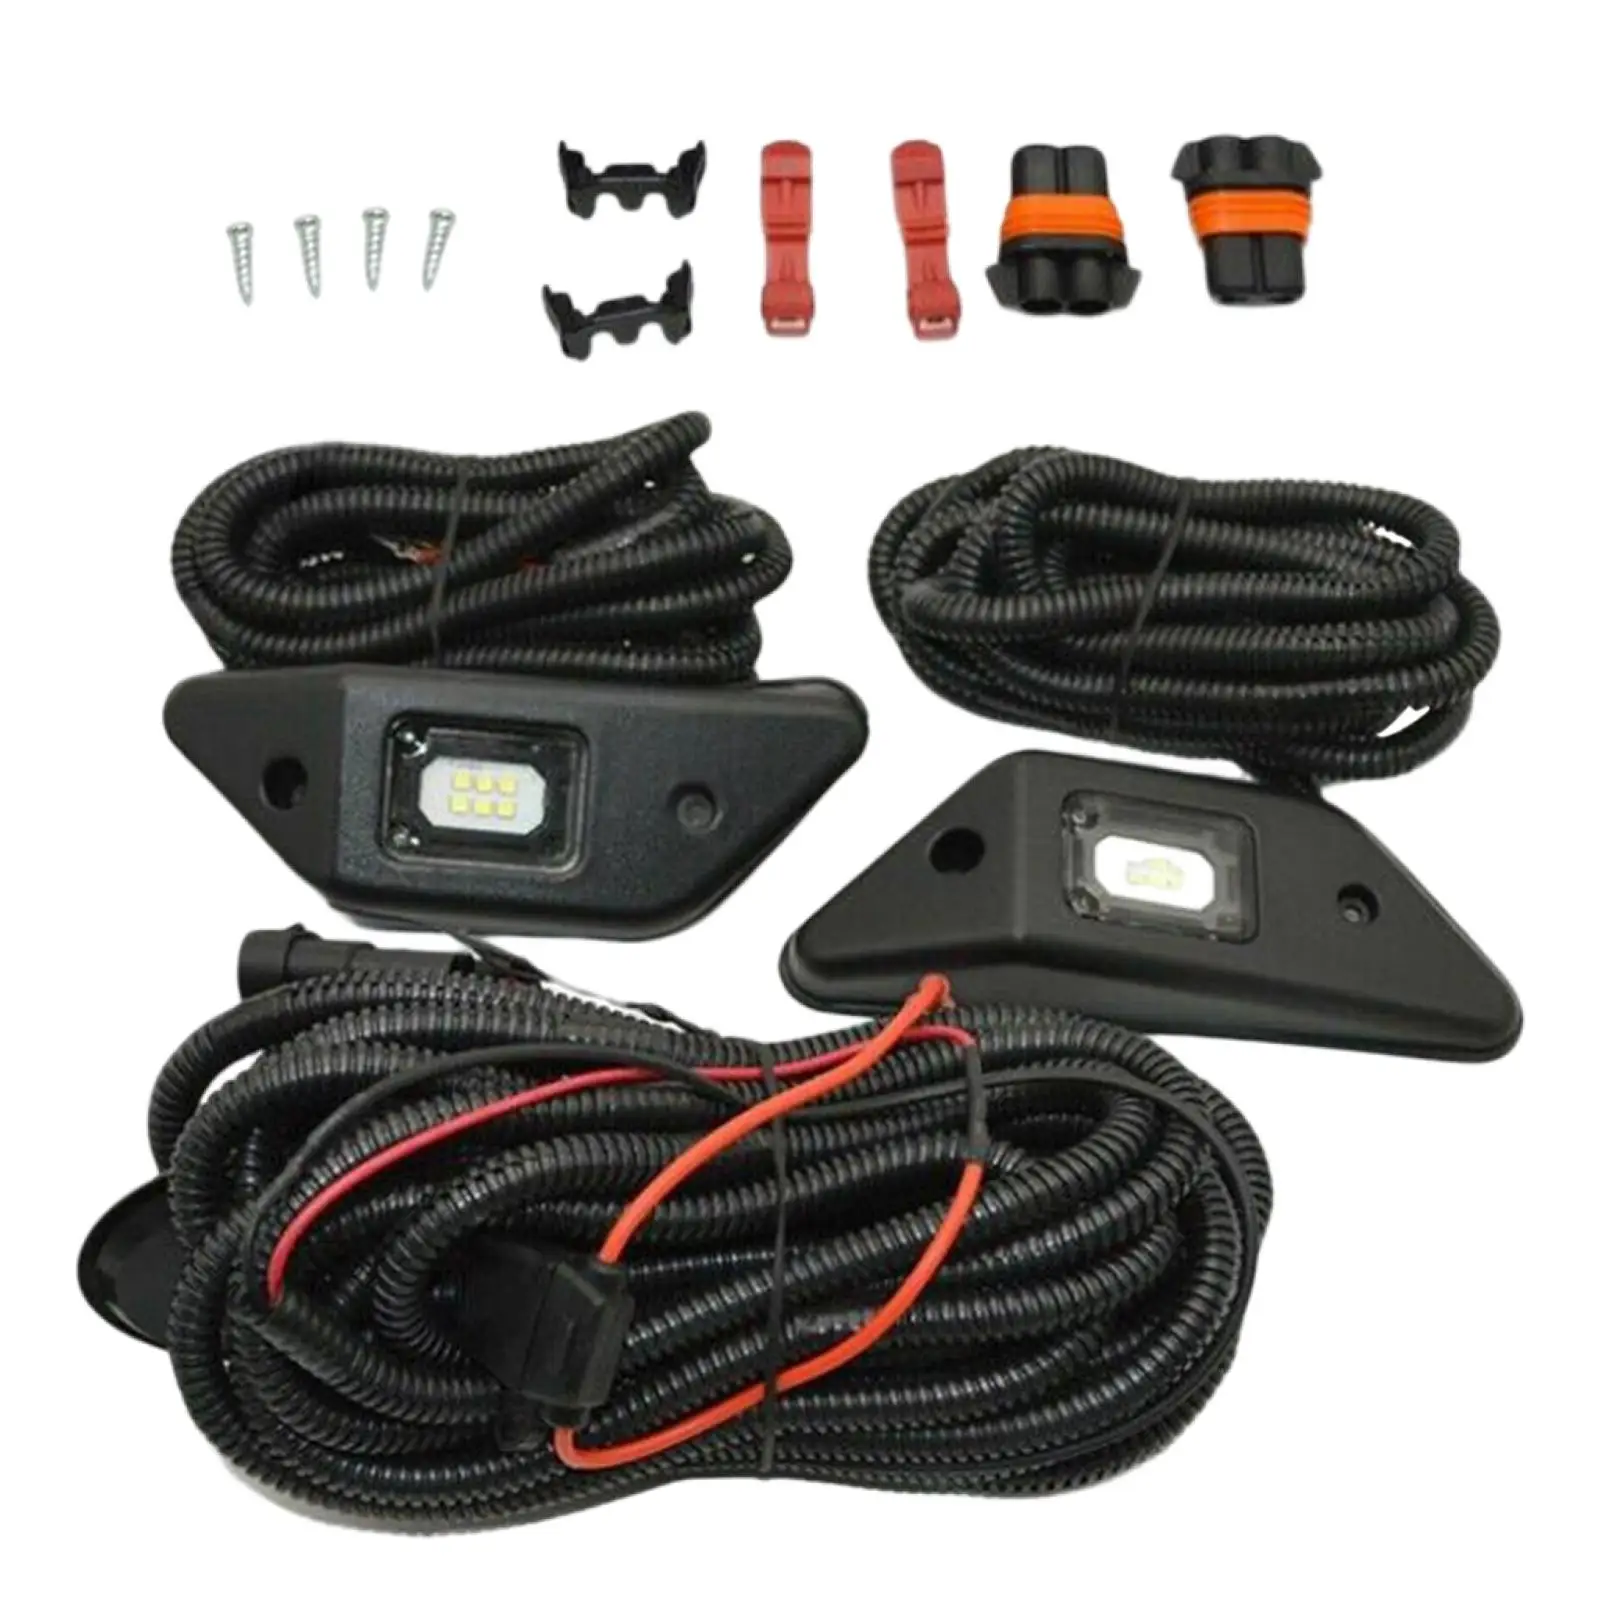 Car LED  Lighting Kit, 000163418016-34187 Wiring Harness  for   2015-2018 Advanced manufacturing technology,